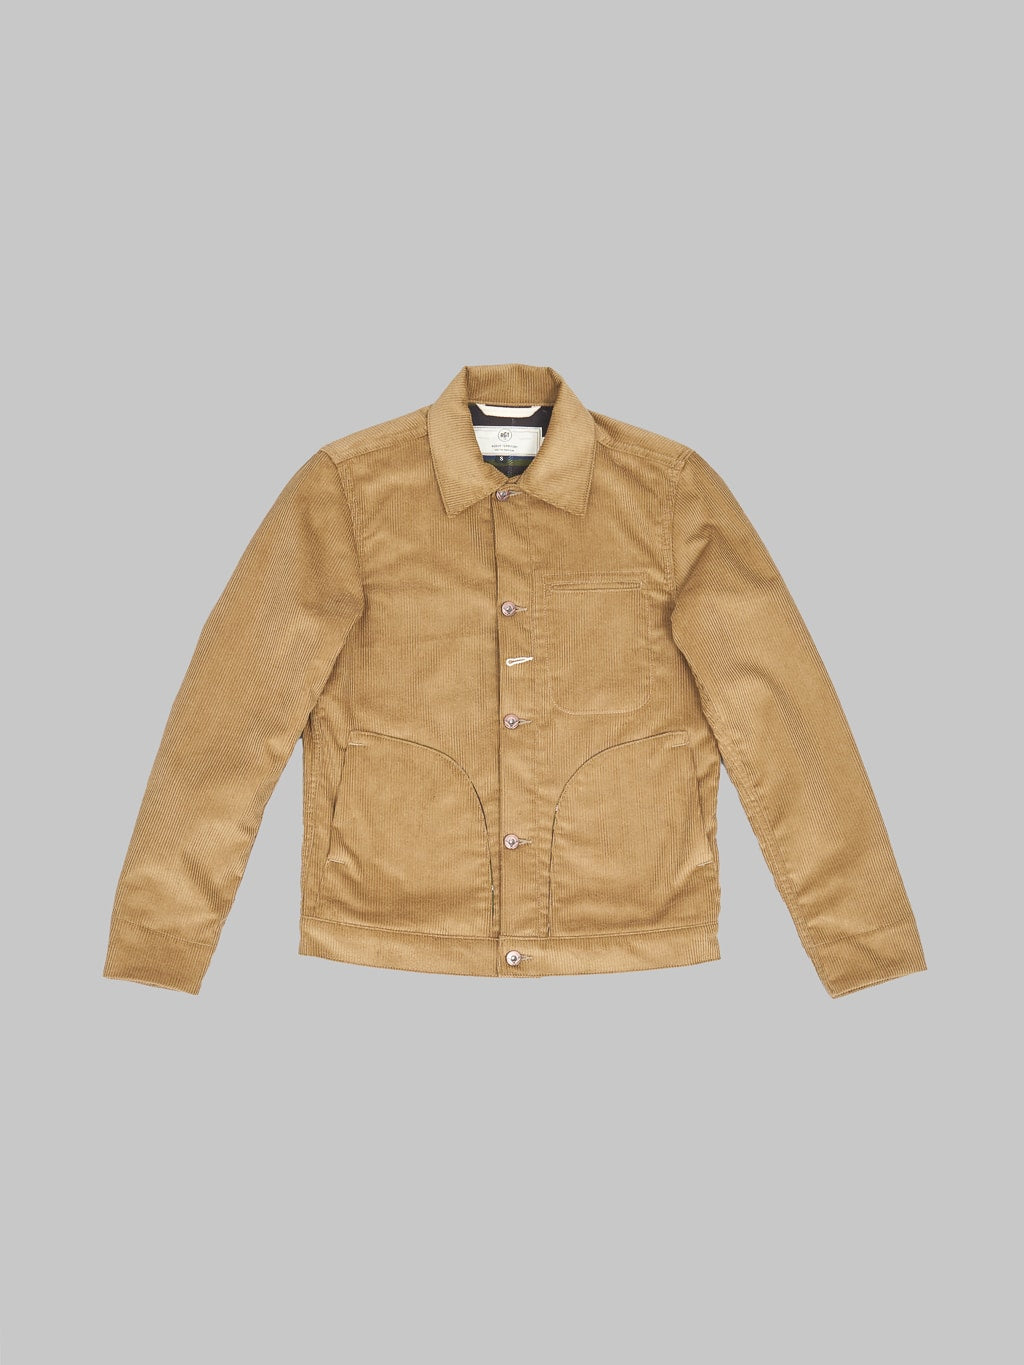 Rogue Territory Supply Jacket Lined Tan Corduroy